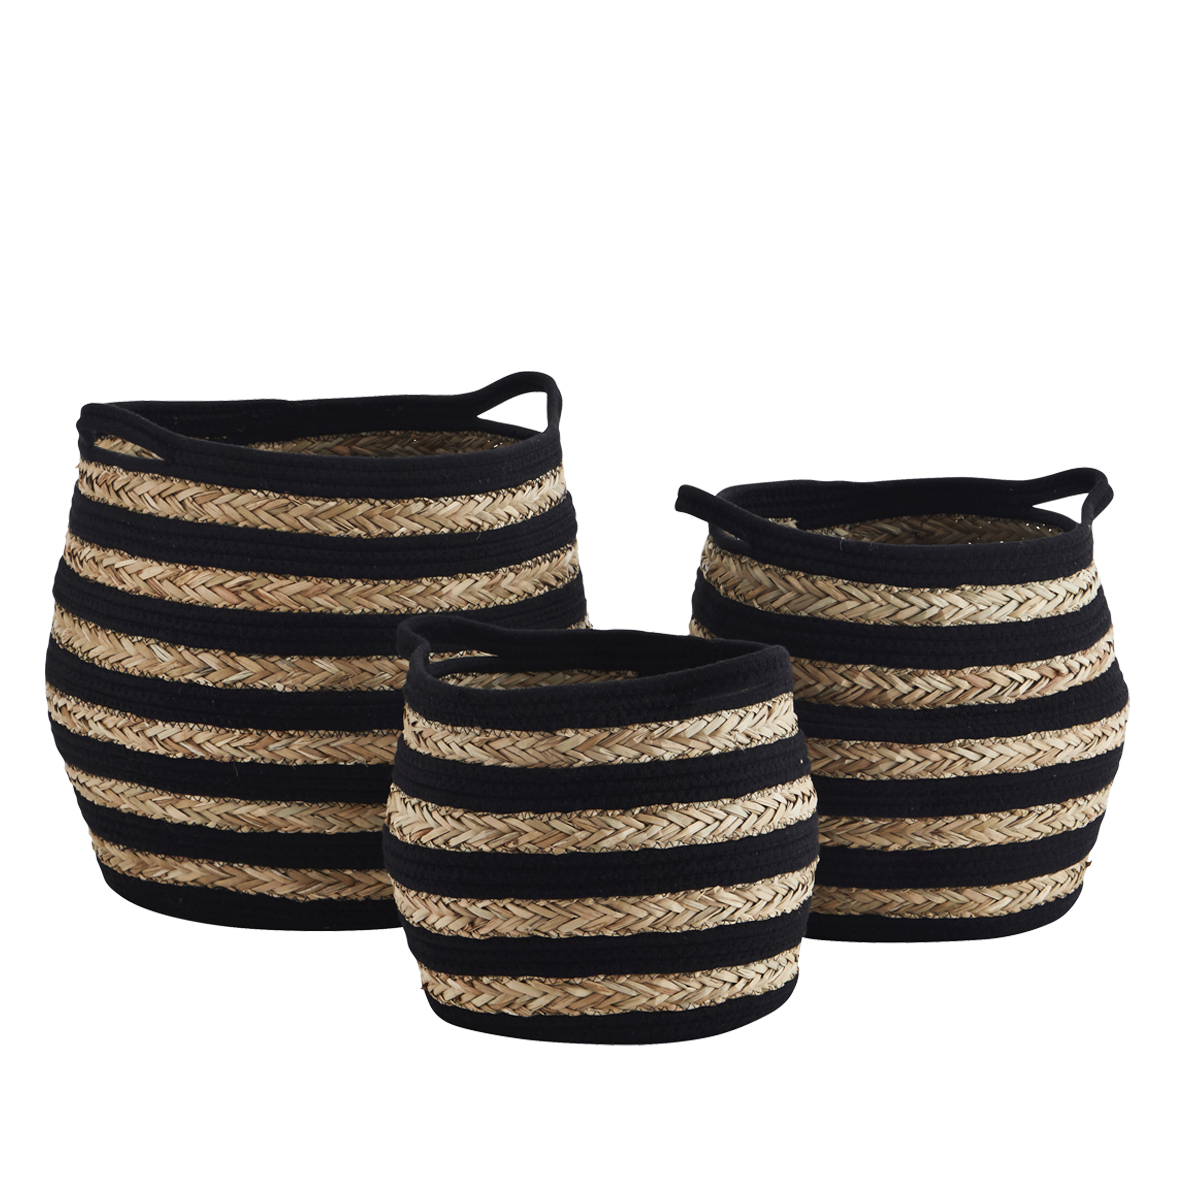 Striped cotton rope baskets